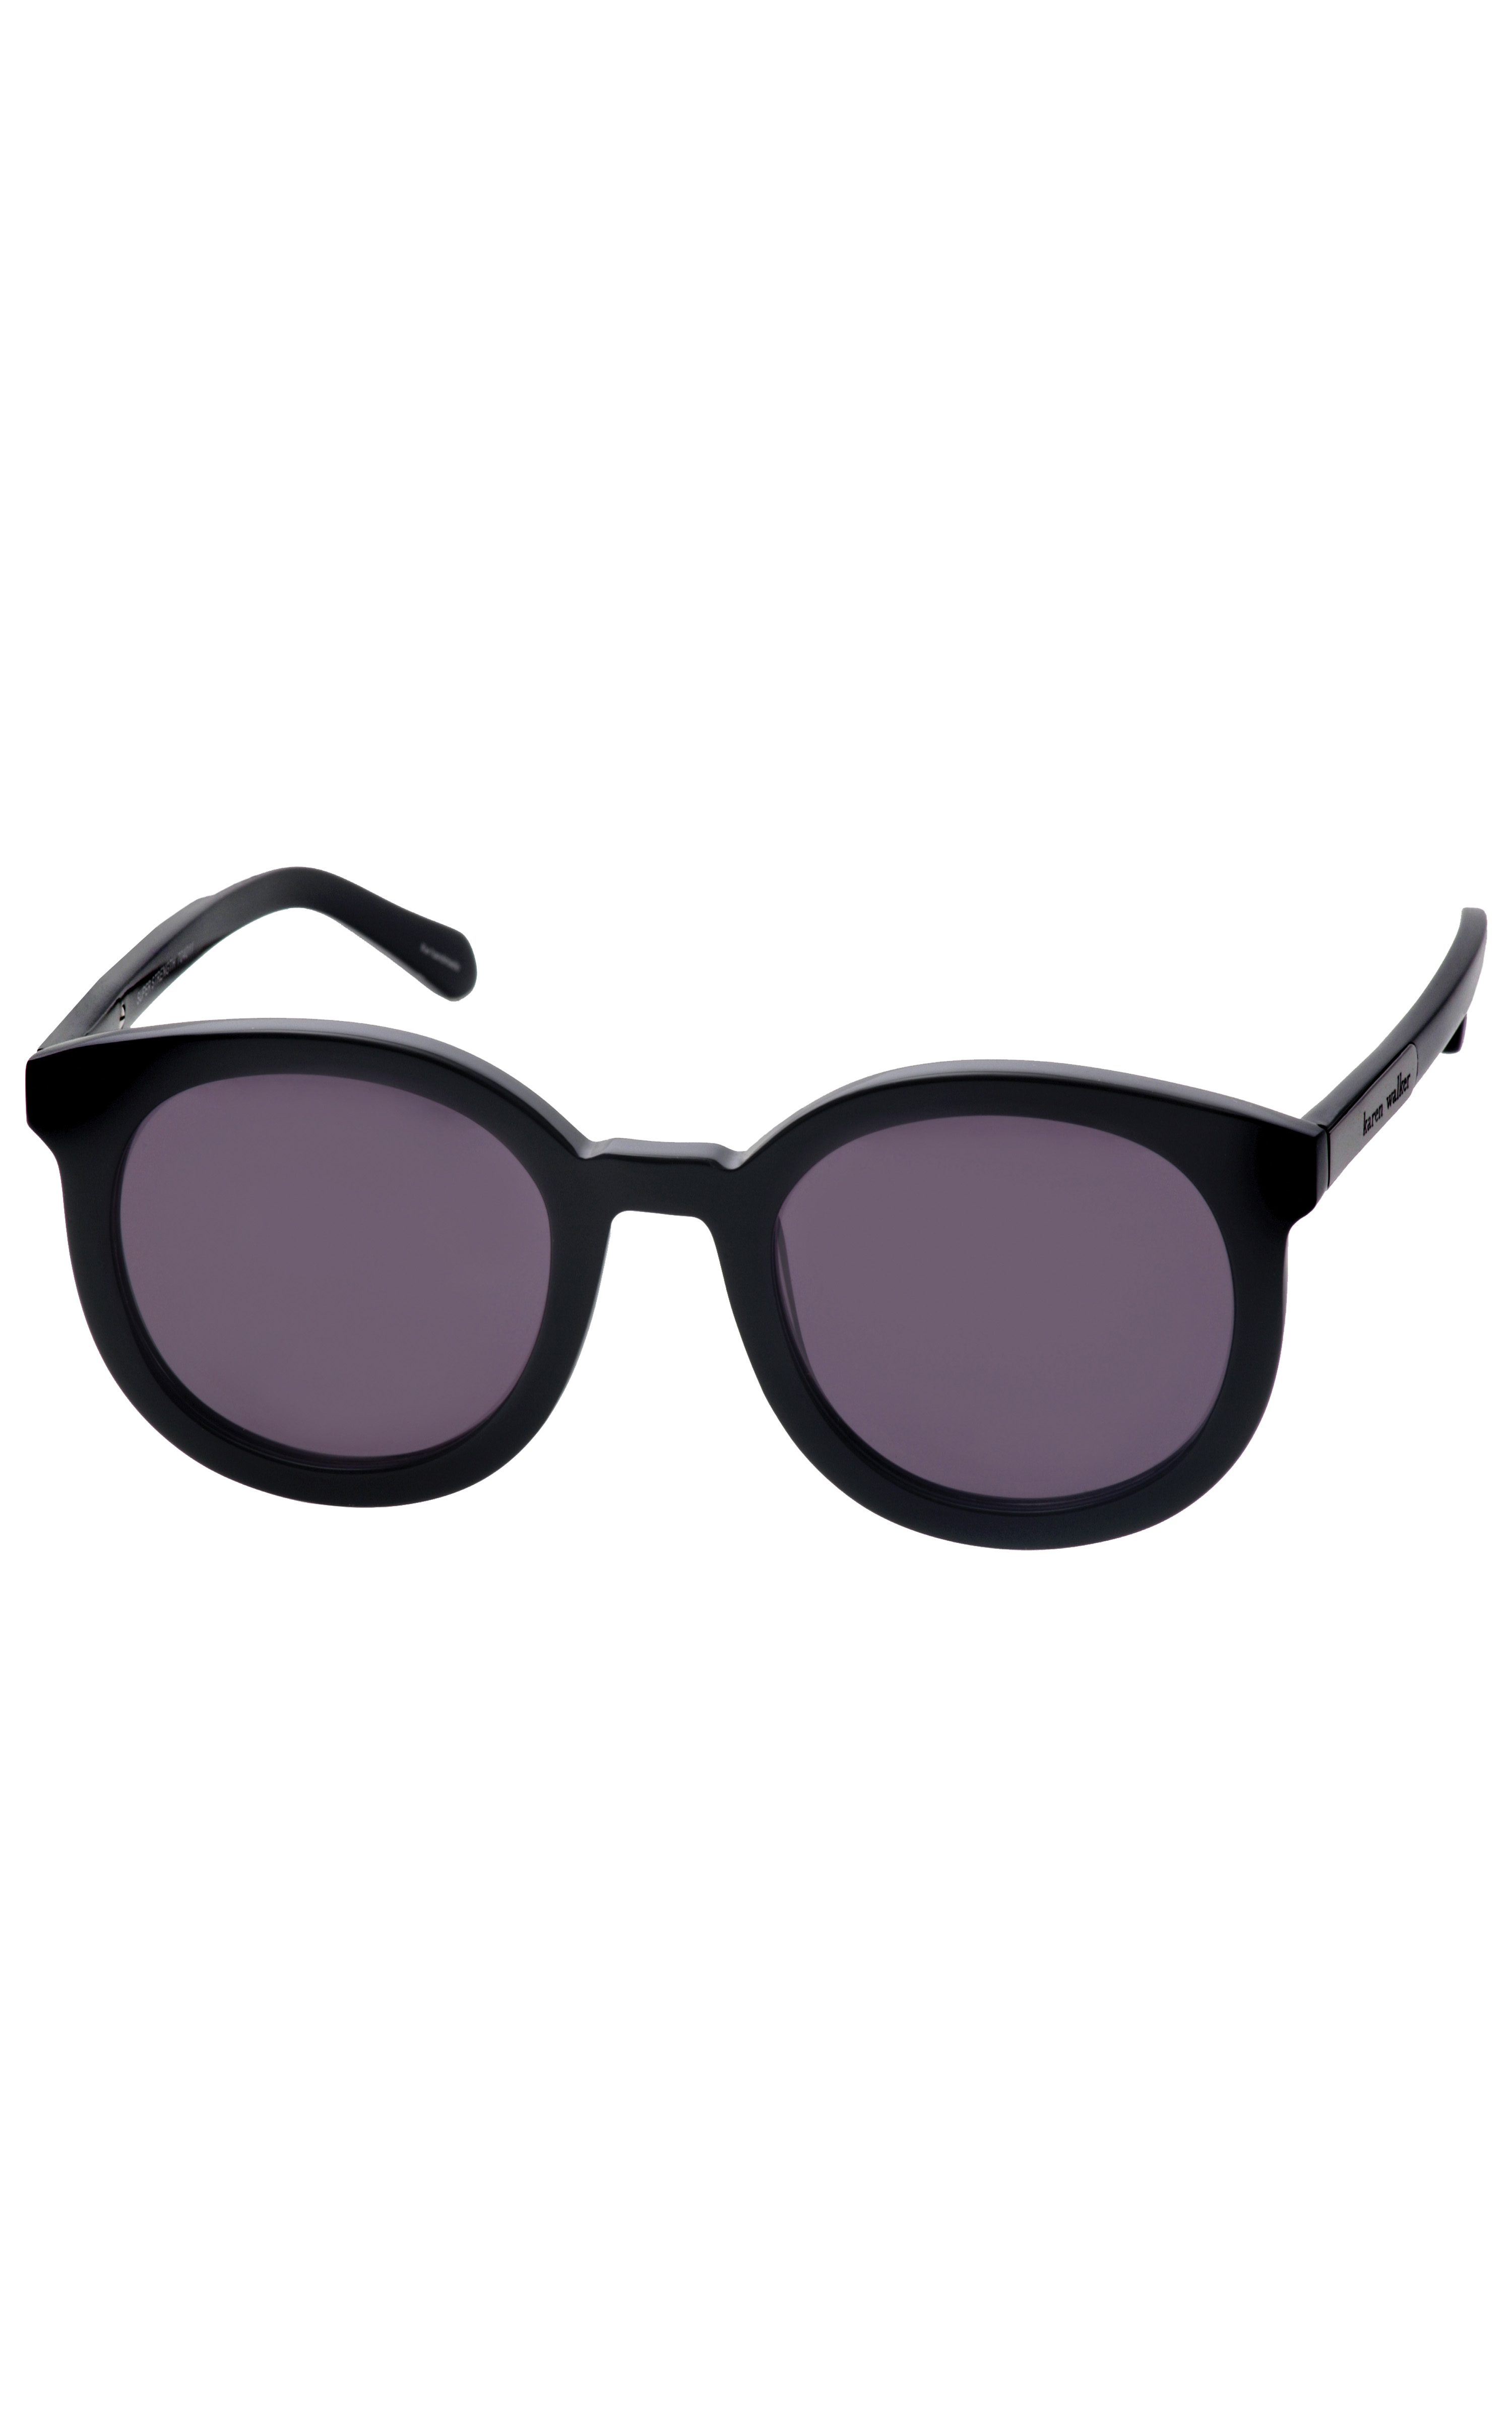 Animated Sunglasses Png ~ Free Red Sunglasses Cliparts, Download Free ...